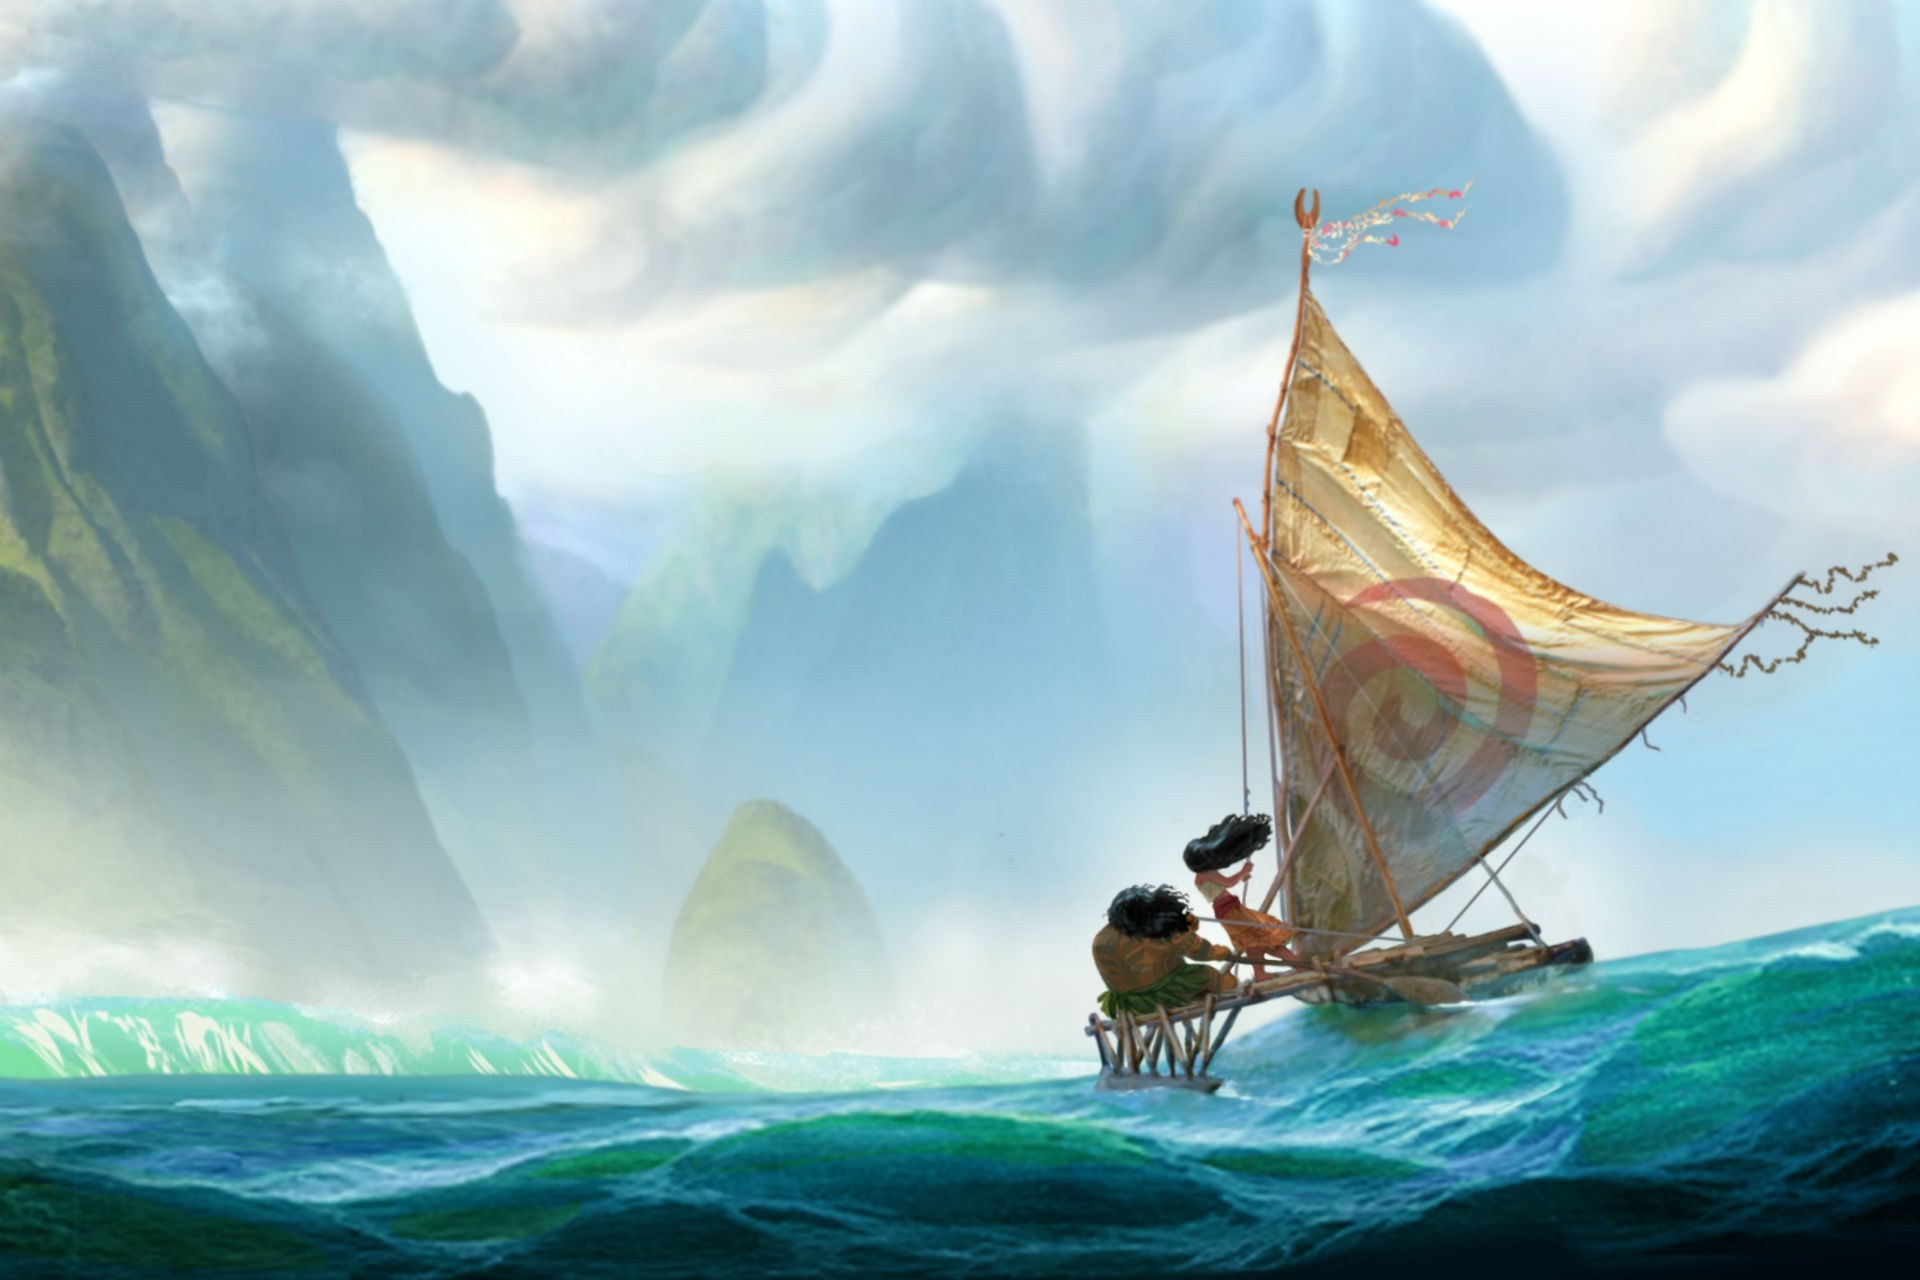 A scene from Walt Disney Pictures' Moana (2016)